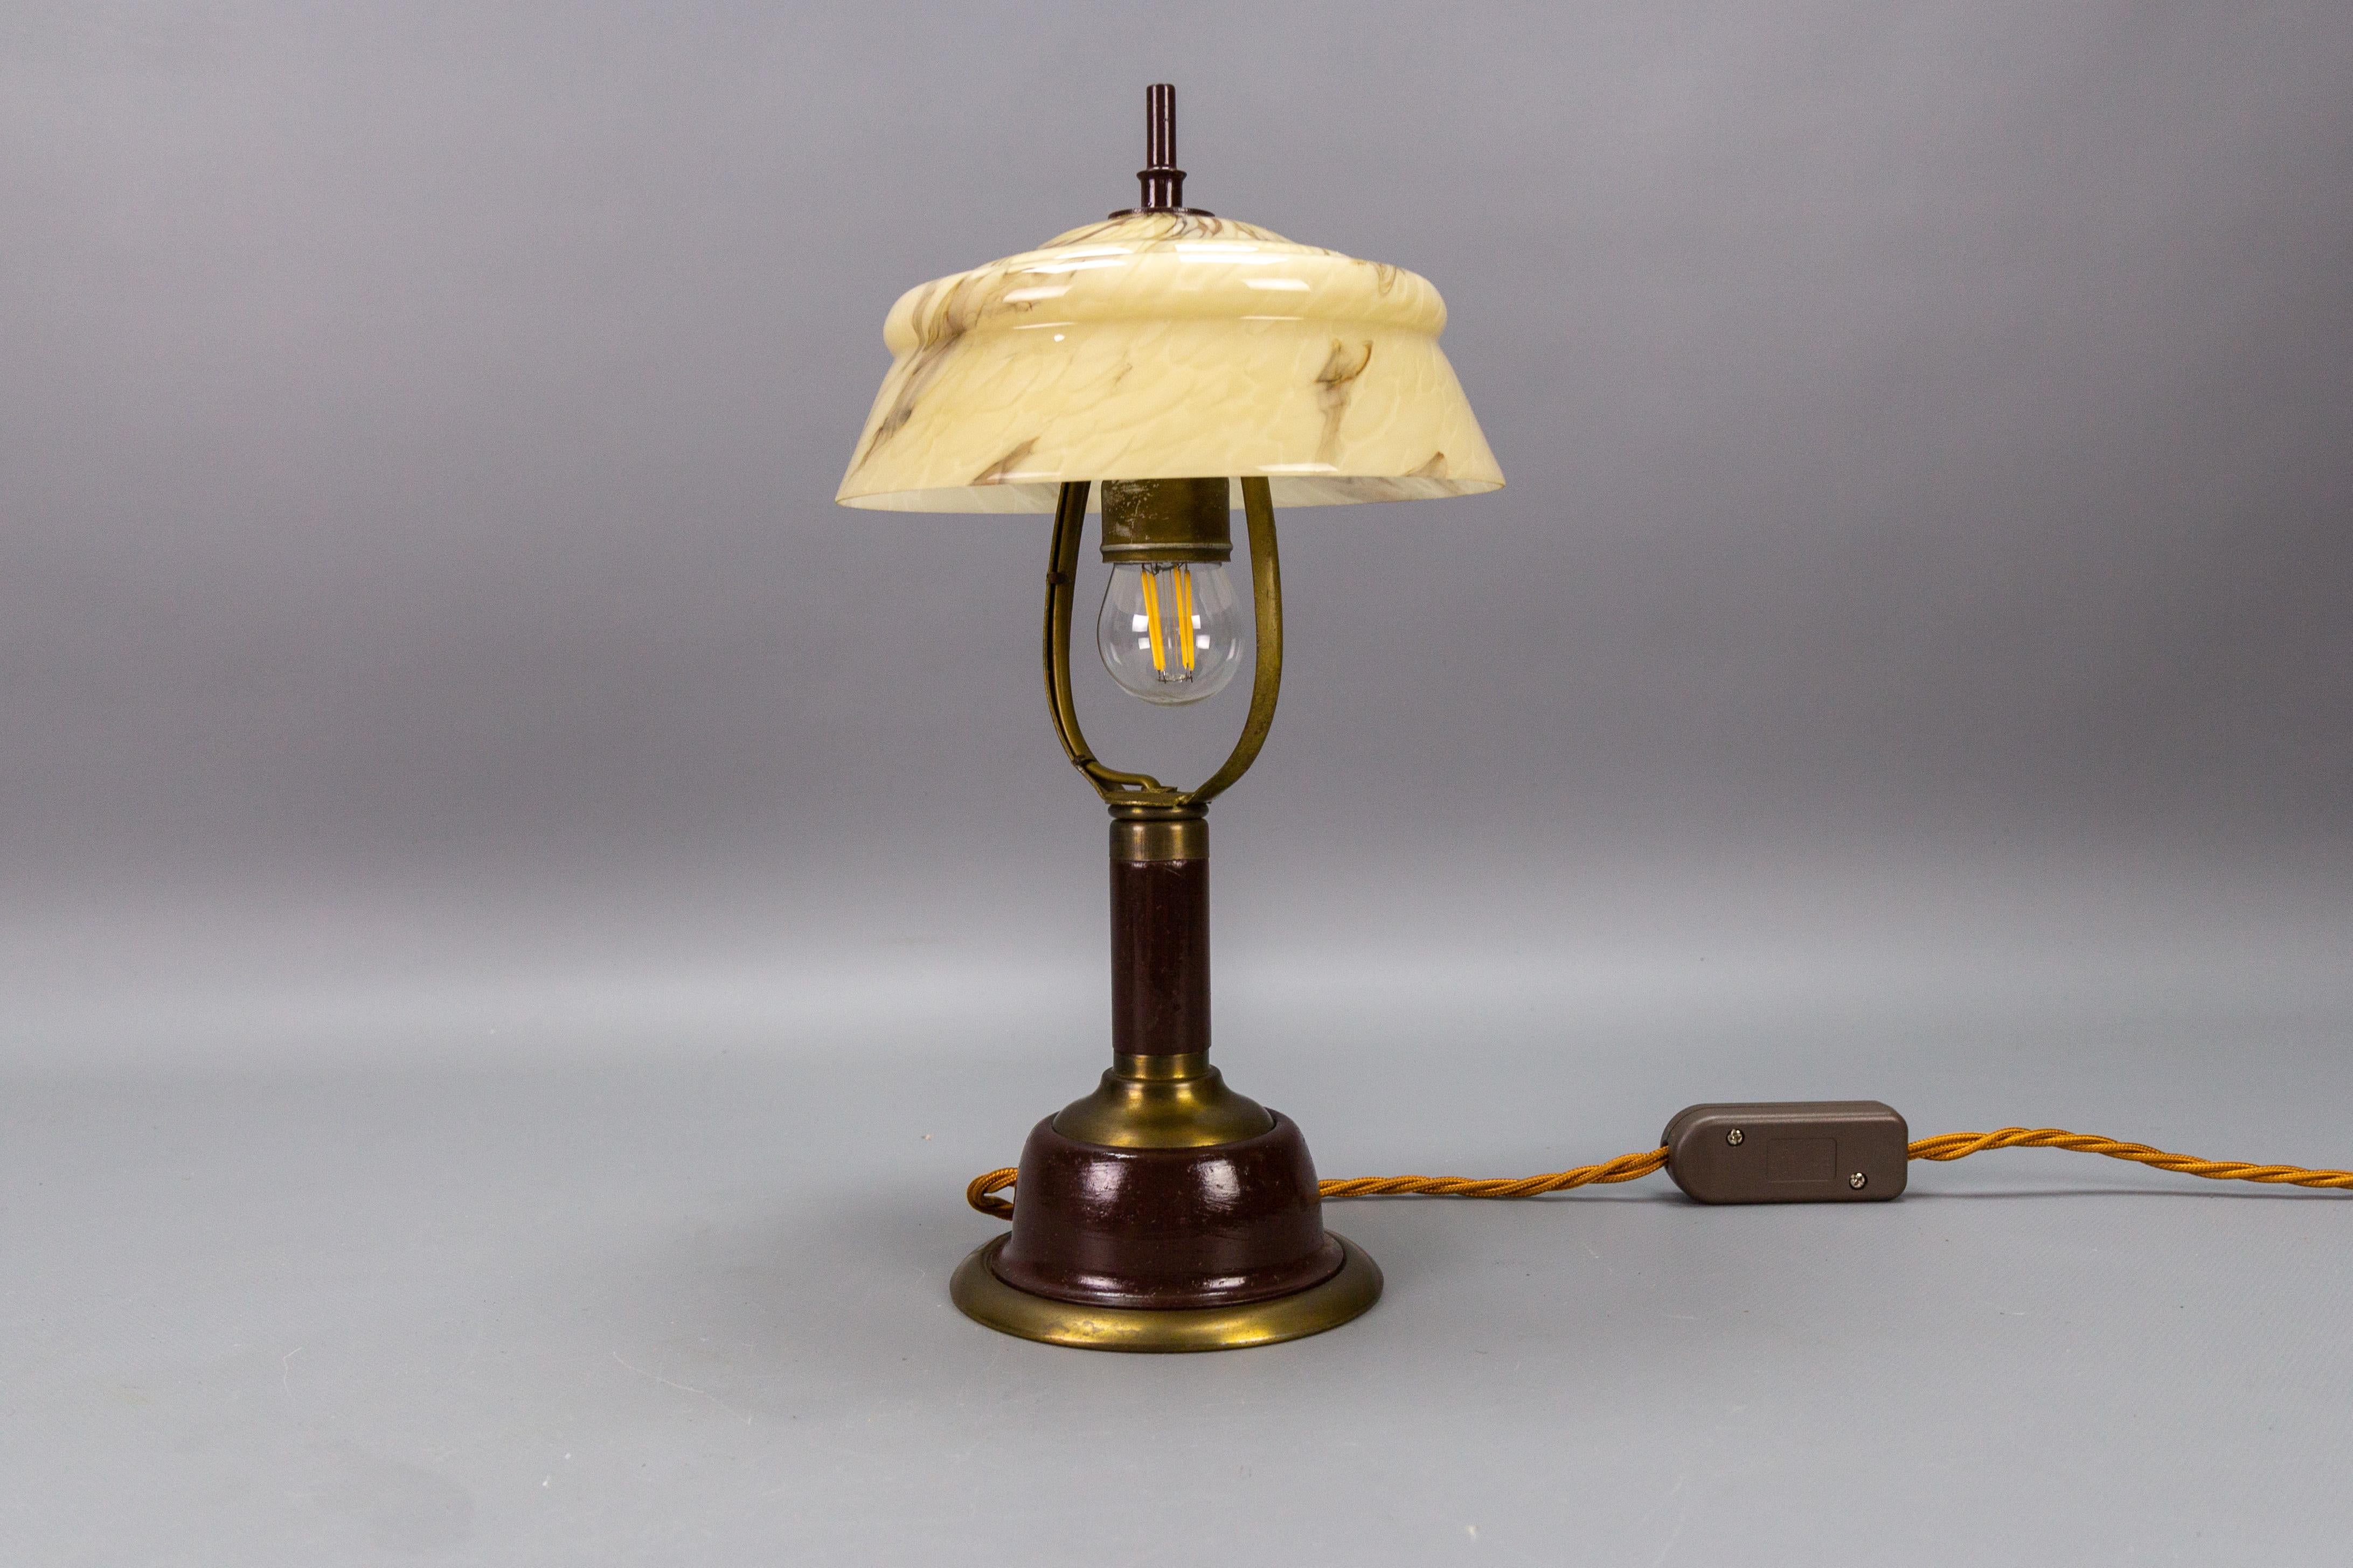 Vintage brown marbled glass and metal adjustable table lamp, Germany, circa the 1950s.
This charming Art Deco-style table or desk lamp features a metal body in brown and brass color with a marbled glass lampshade - the glass shade blends a marbled